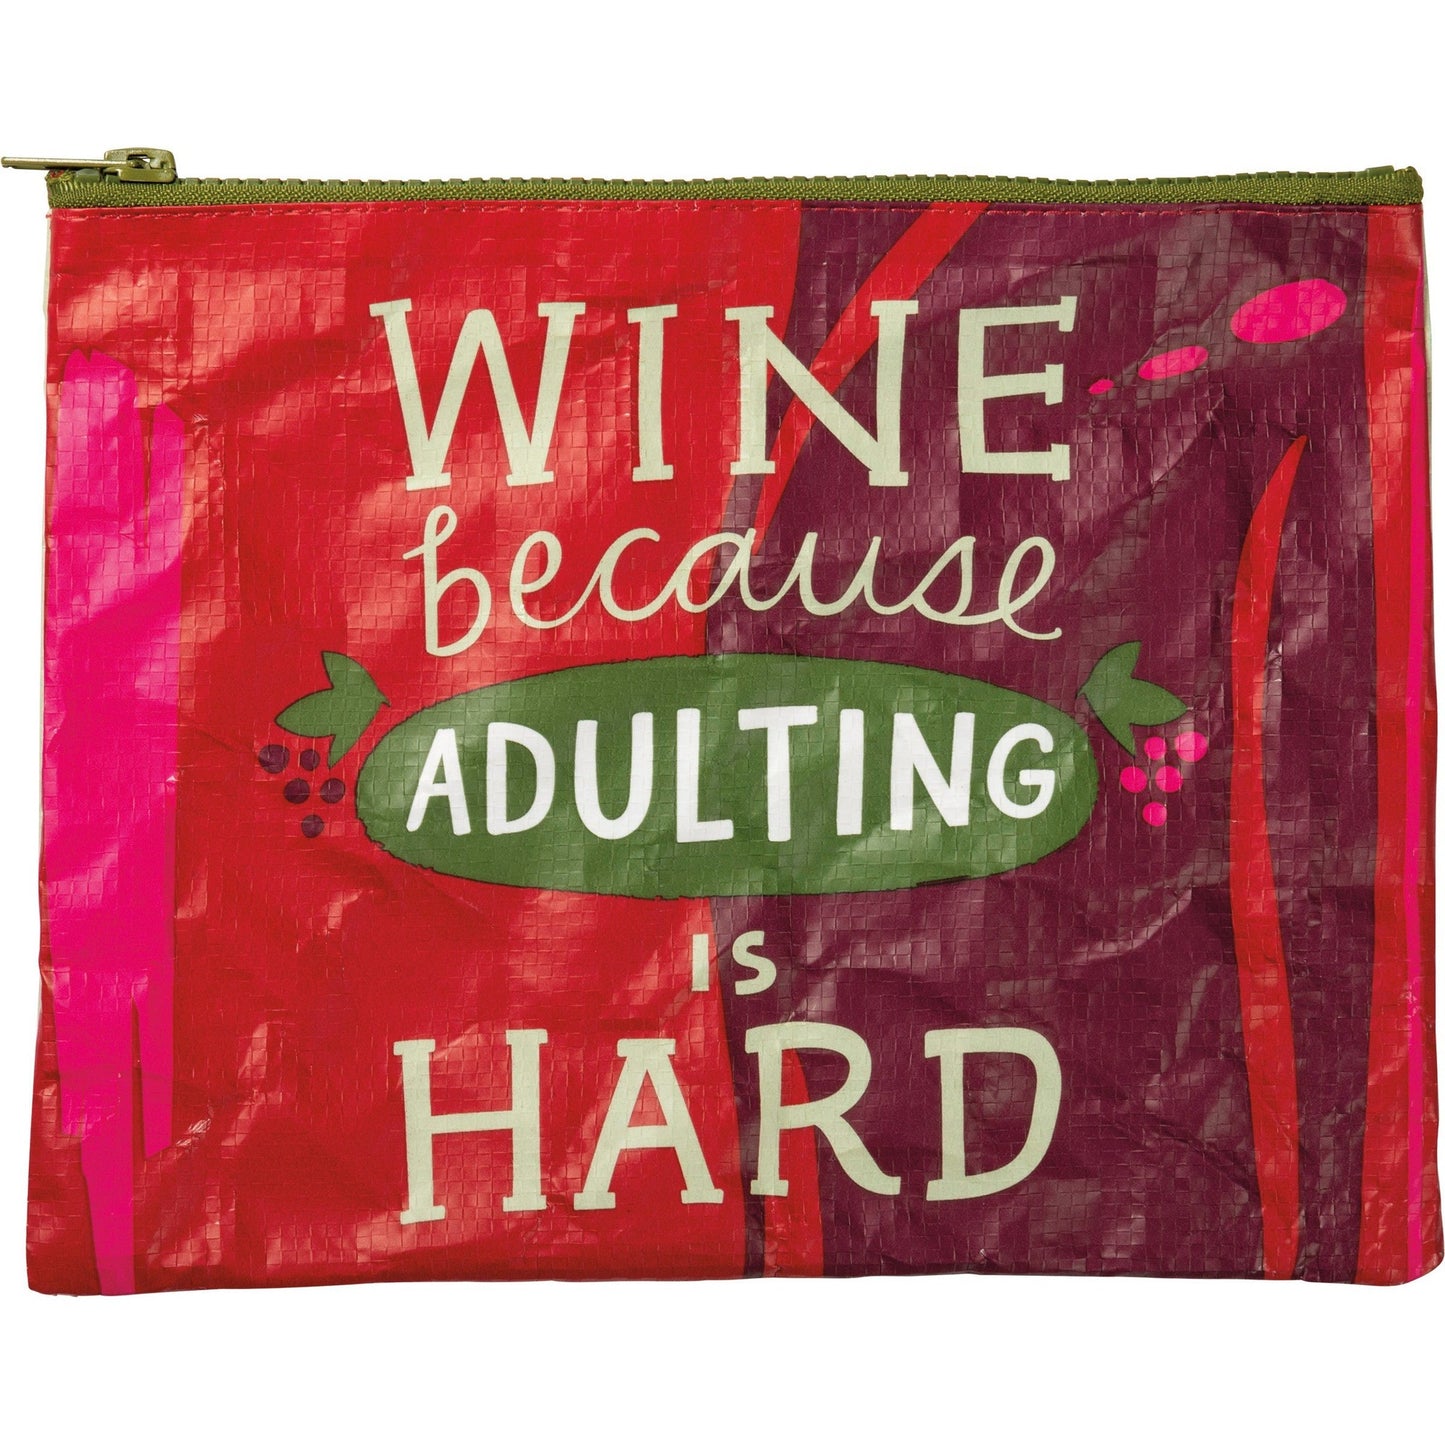 Wine Because Adulting Is Hard Recycled Material Cute/Cool/Unique Zipper Pouch/Bag/Clutch/Cosmetic Bag | 9.5" x 7"